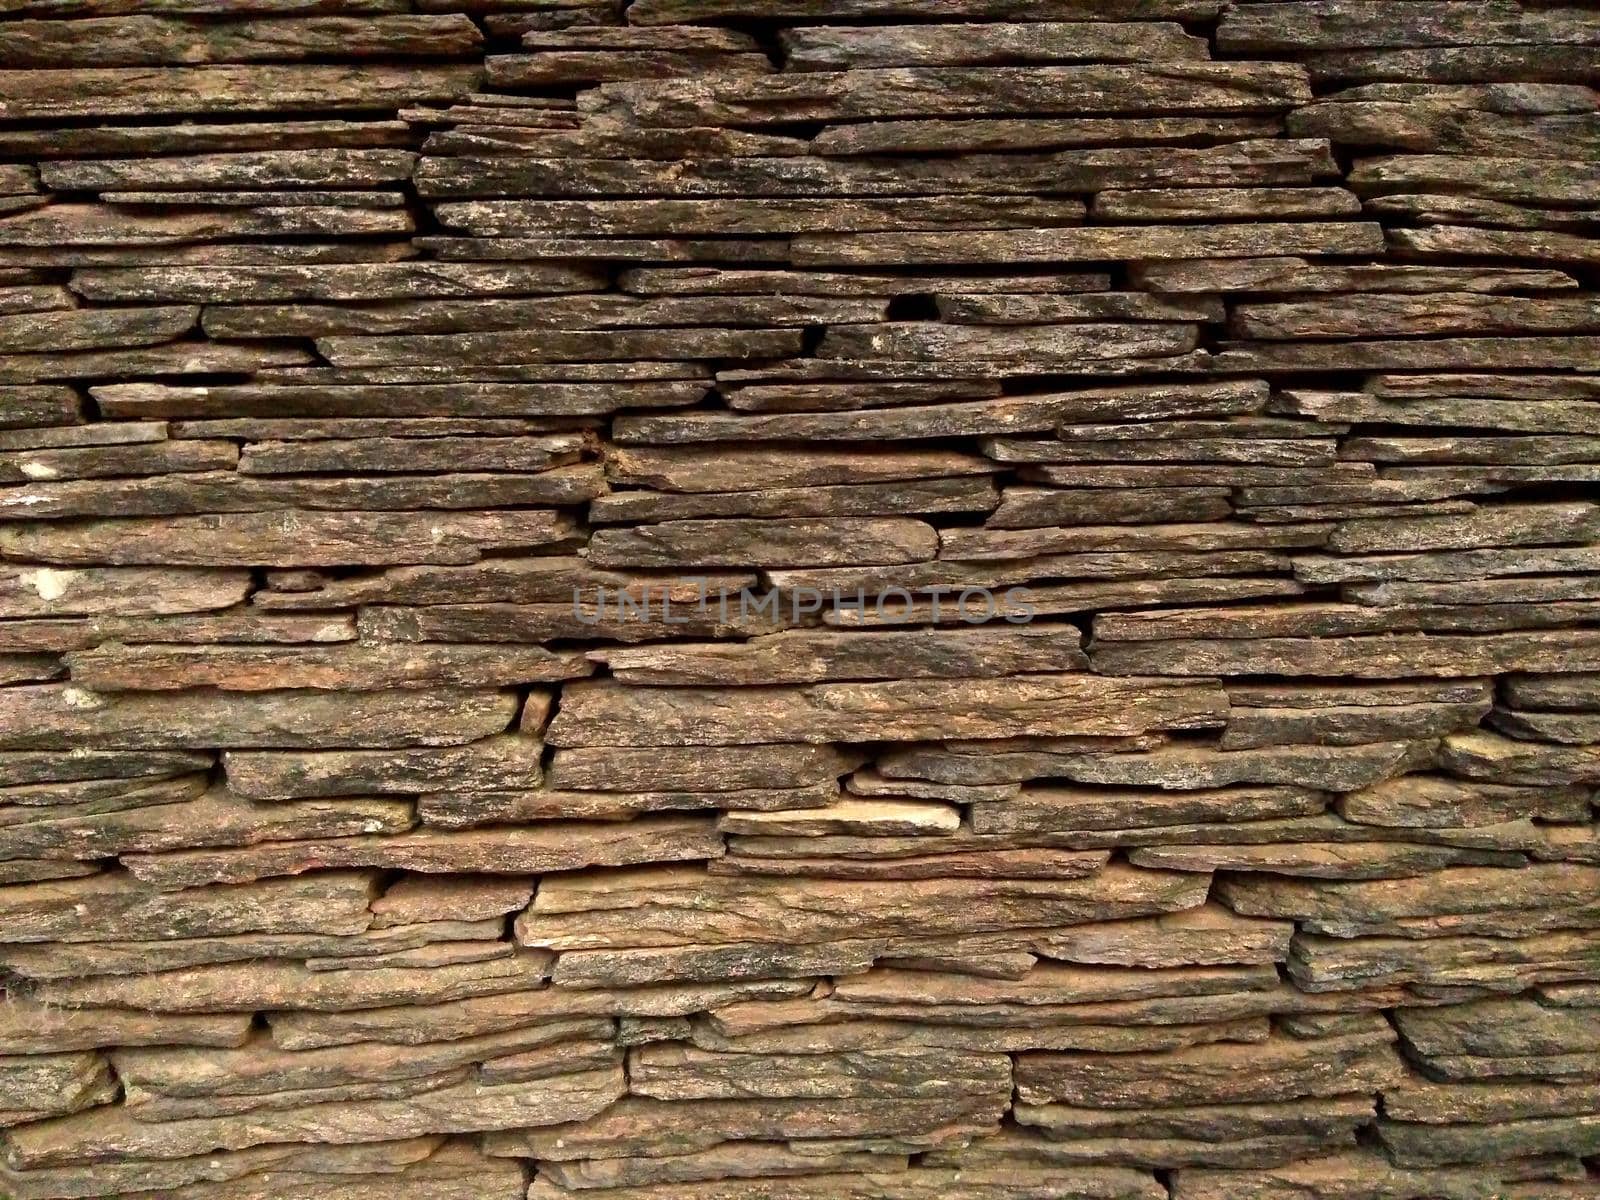 Architecture and interior image of Natural pieces of stone wall.